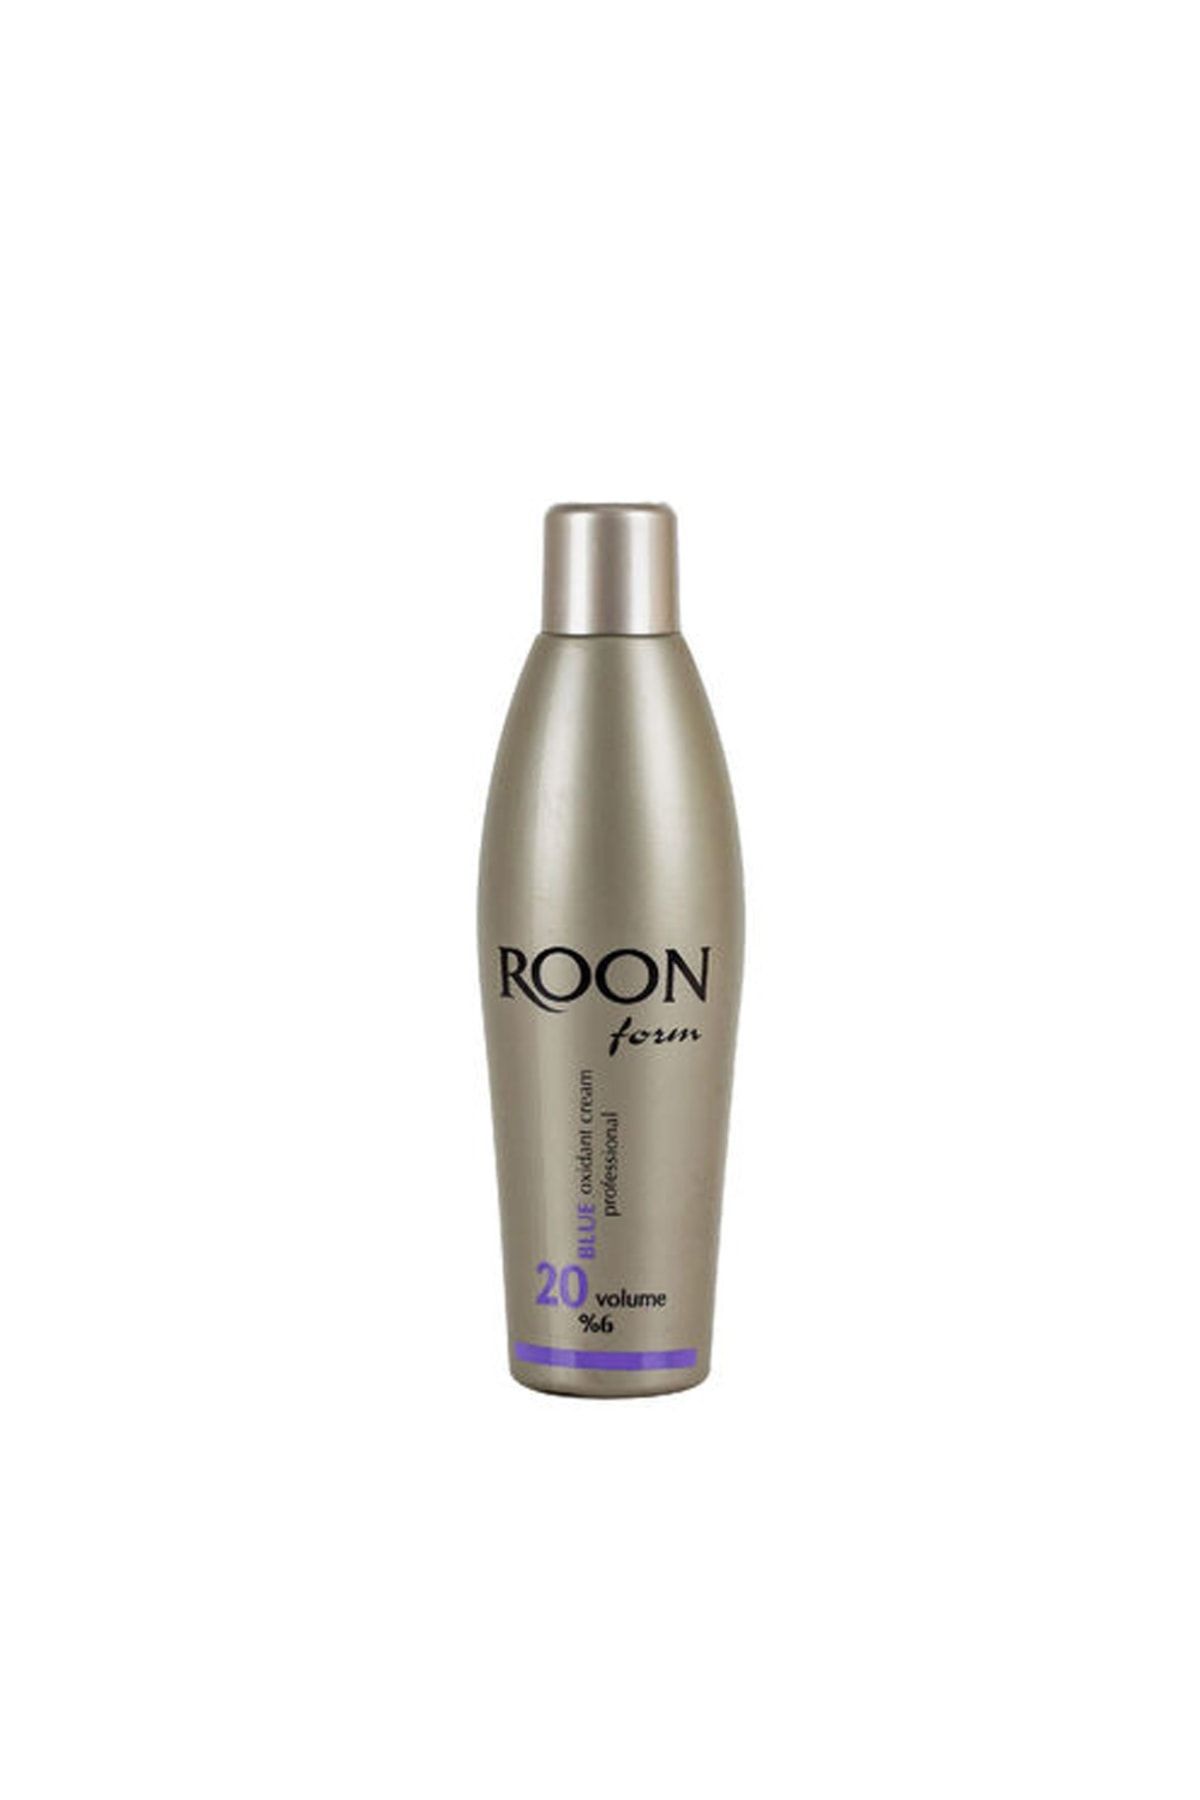 Roon Form Blue Oxy 20 Vol 750 ml